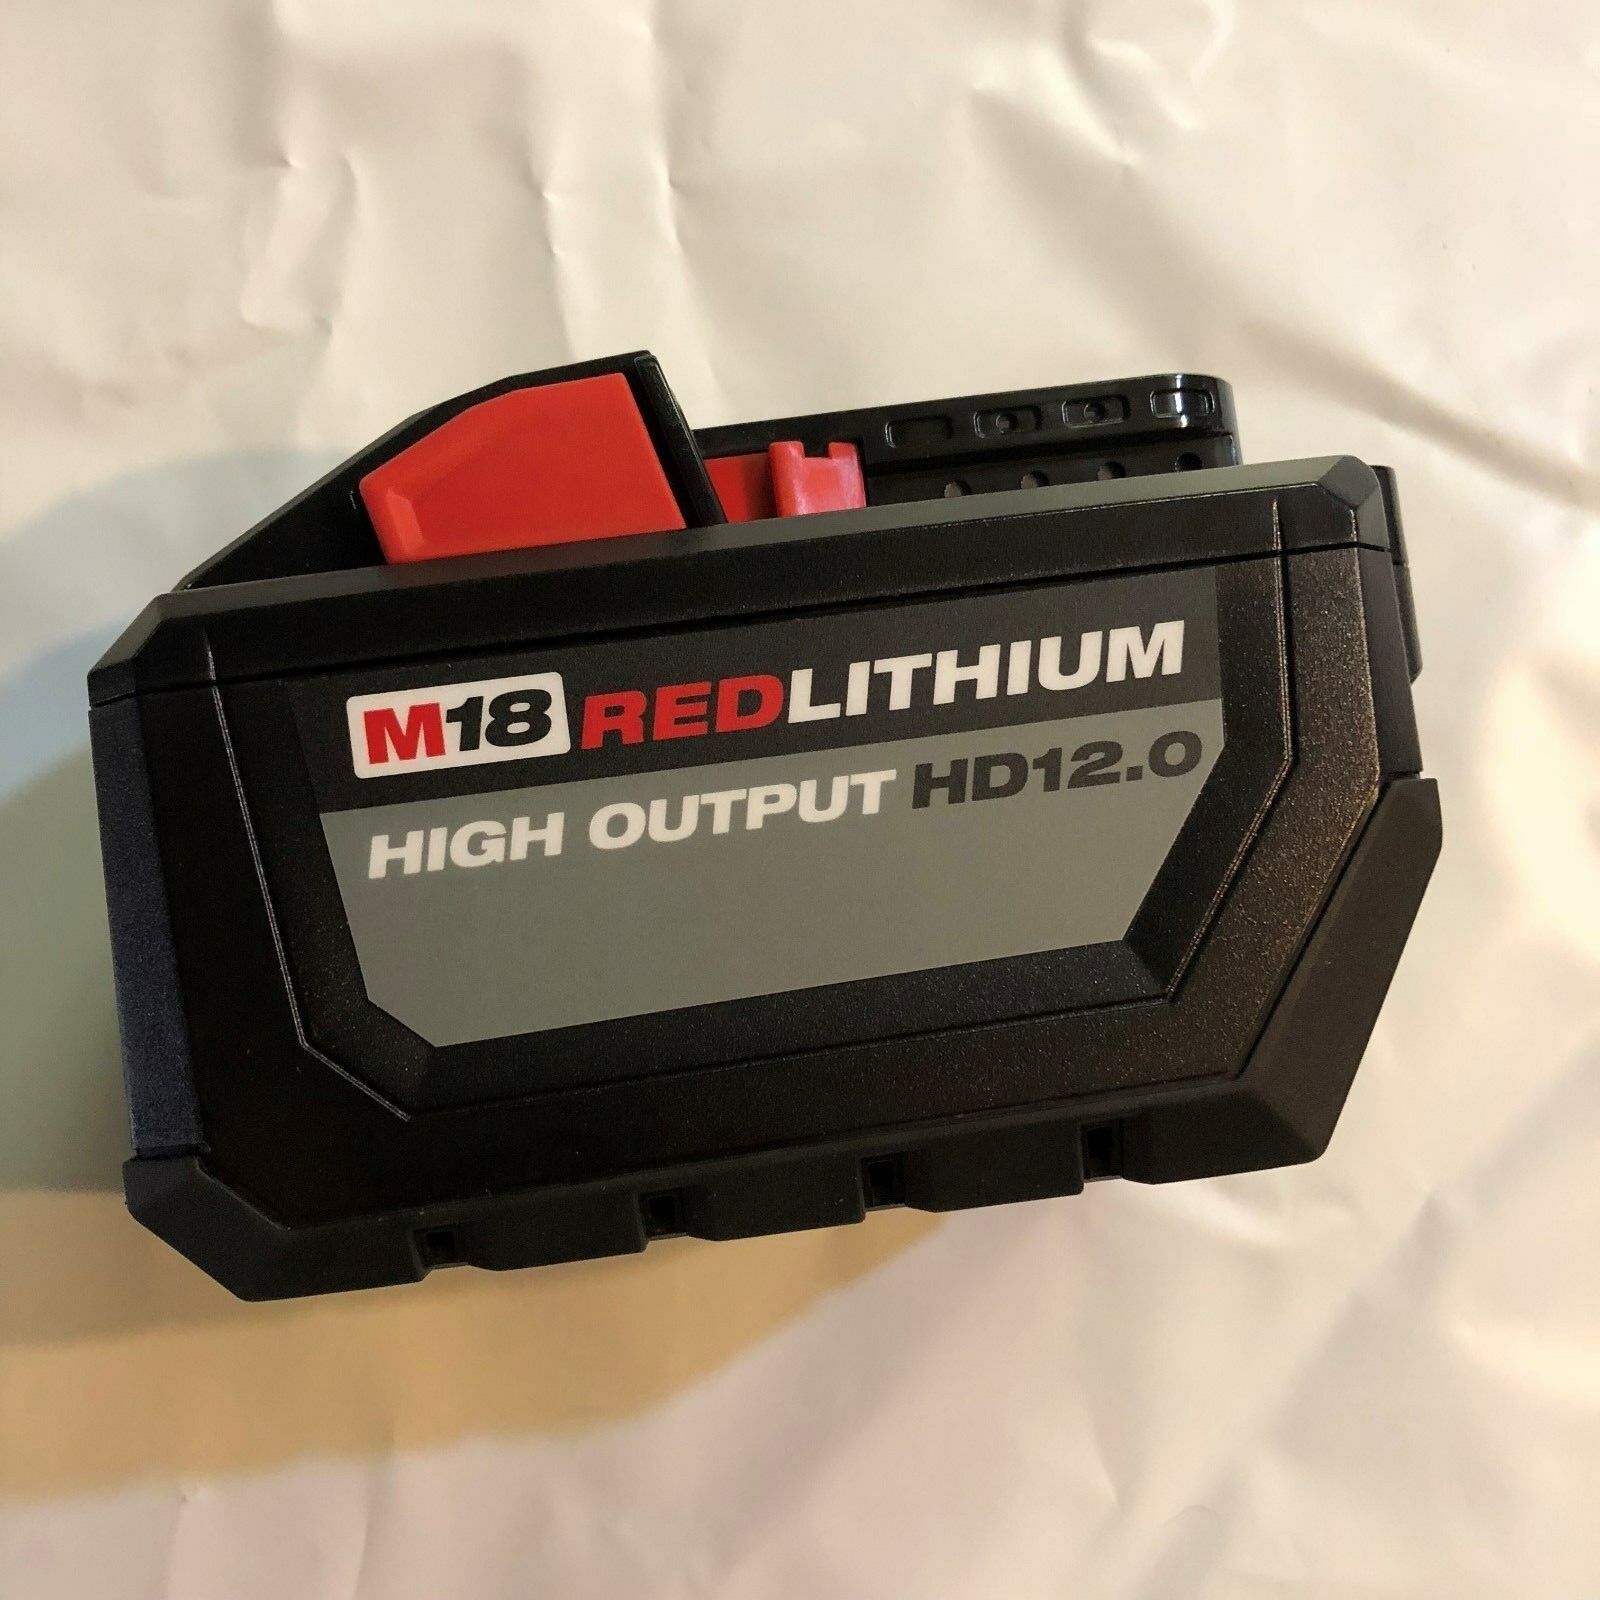 Milwaukee 48-11-1812 M18 12 amp Lithium High Demand Battery NEW 2 DAY SHIPPING - $79.00